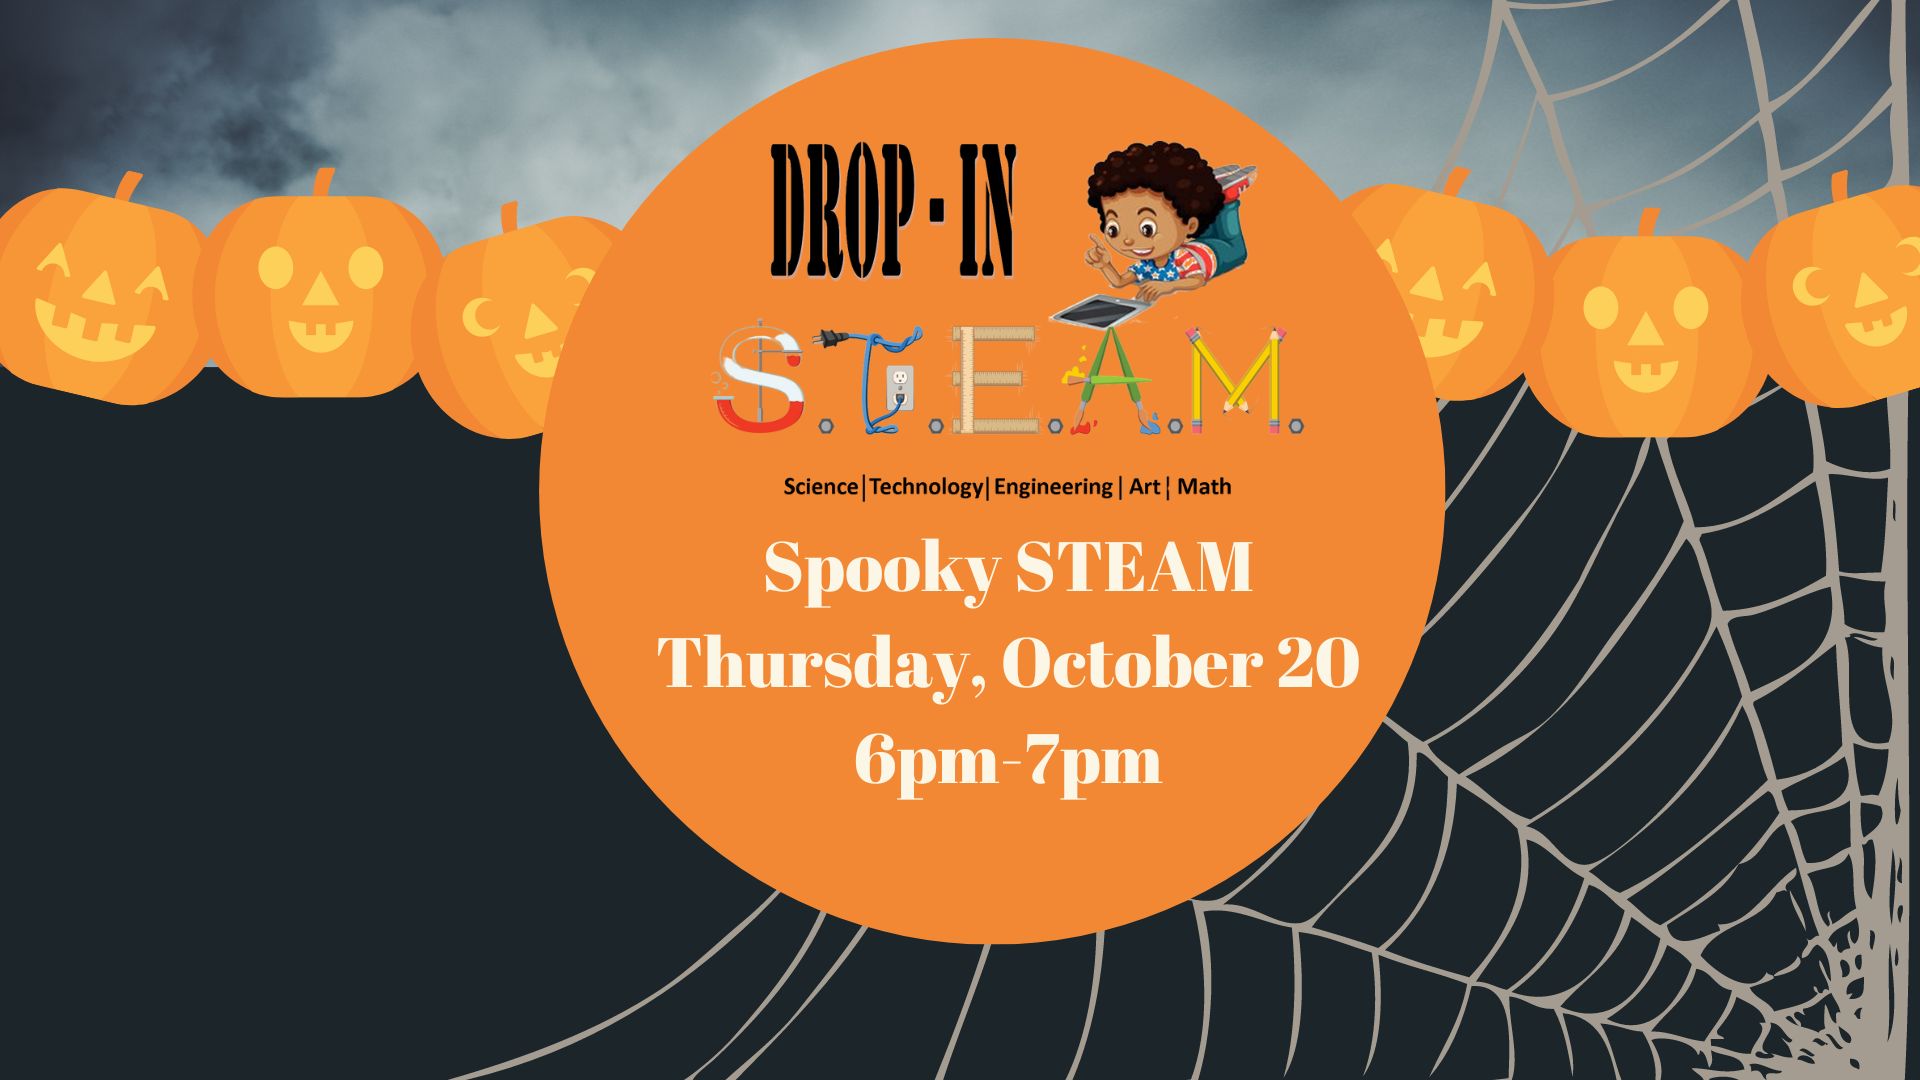 Flyer for Spooky STEAM